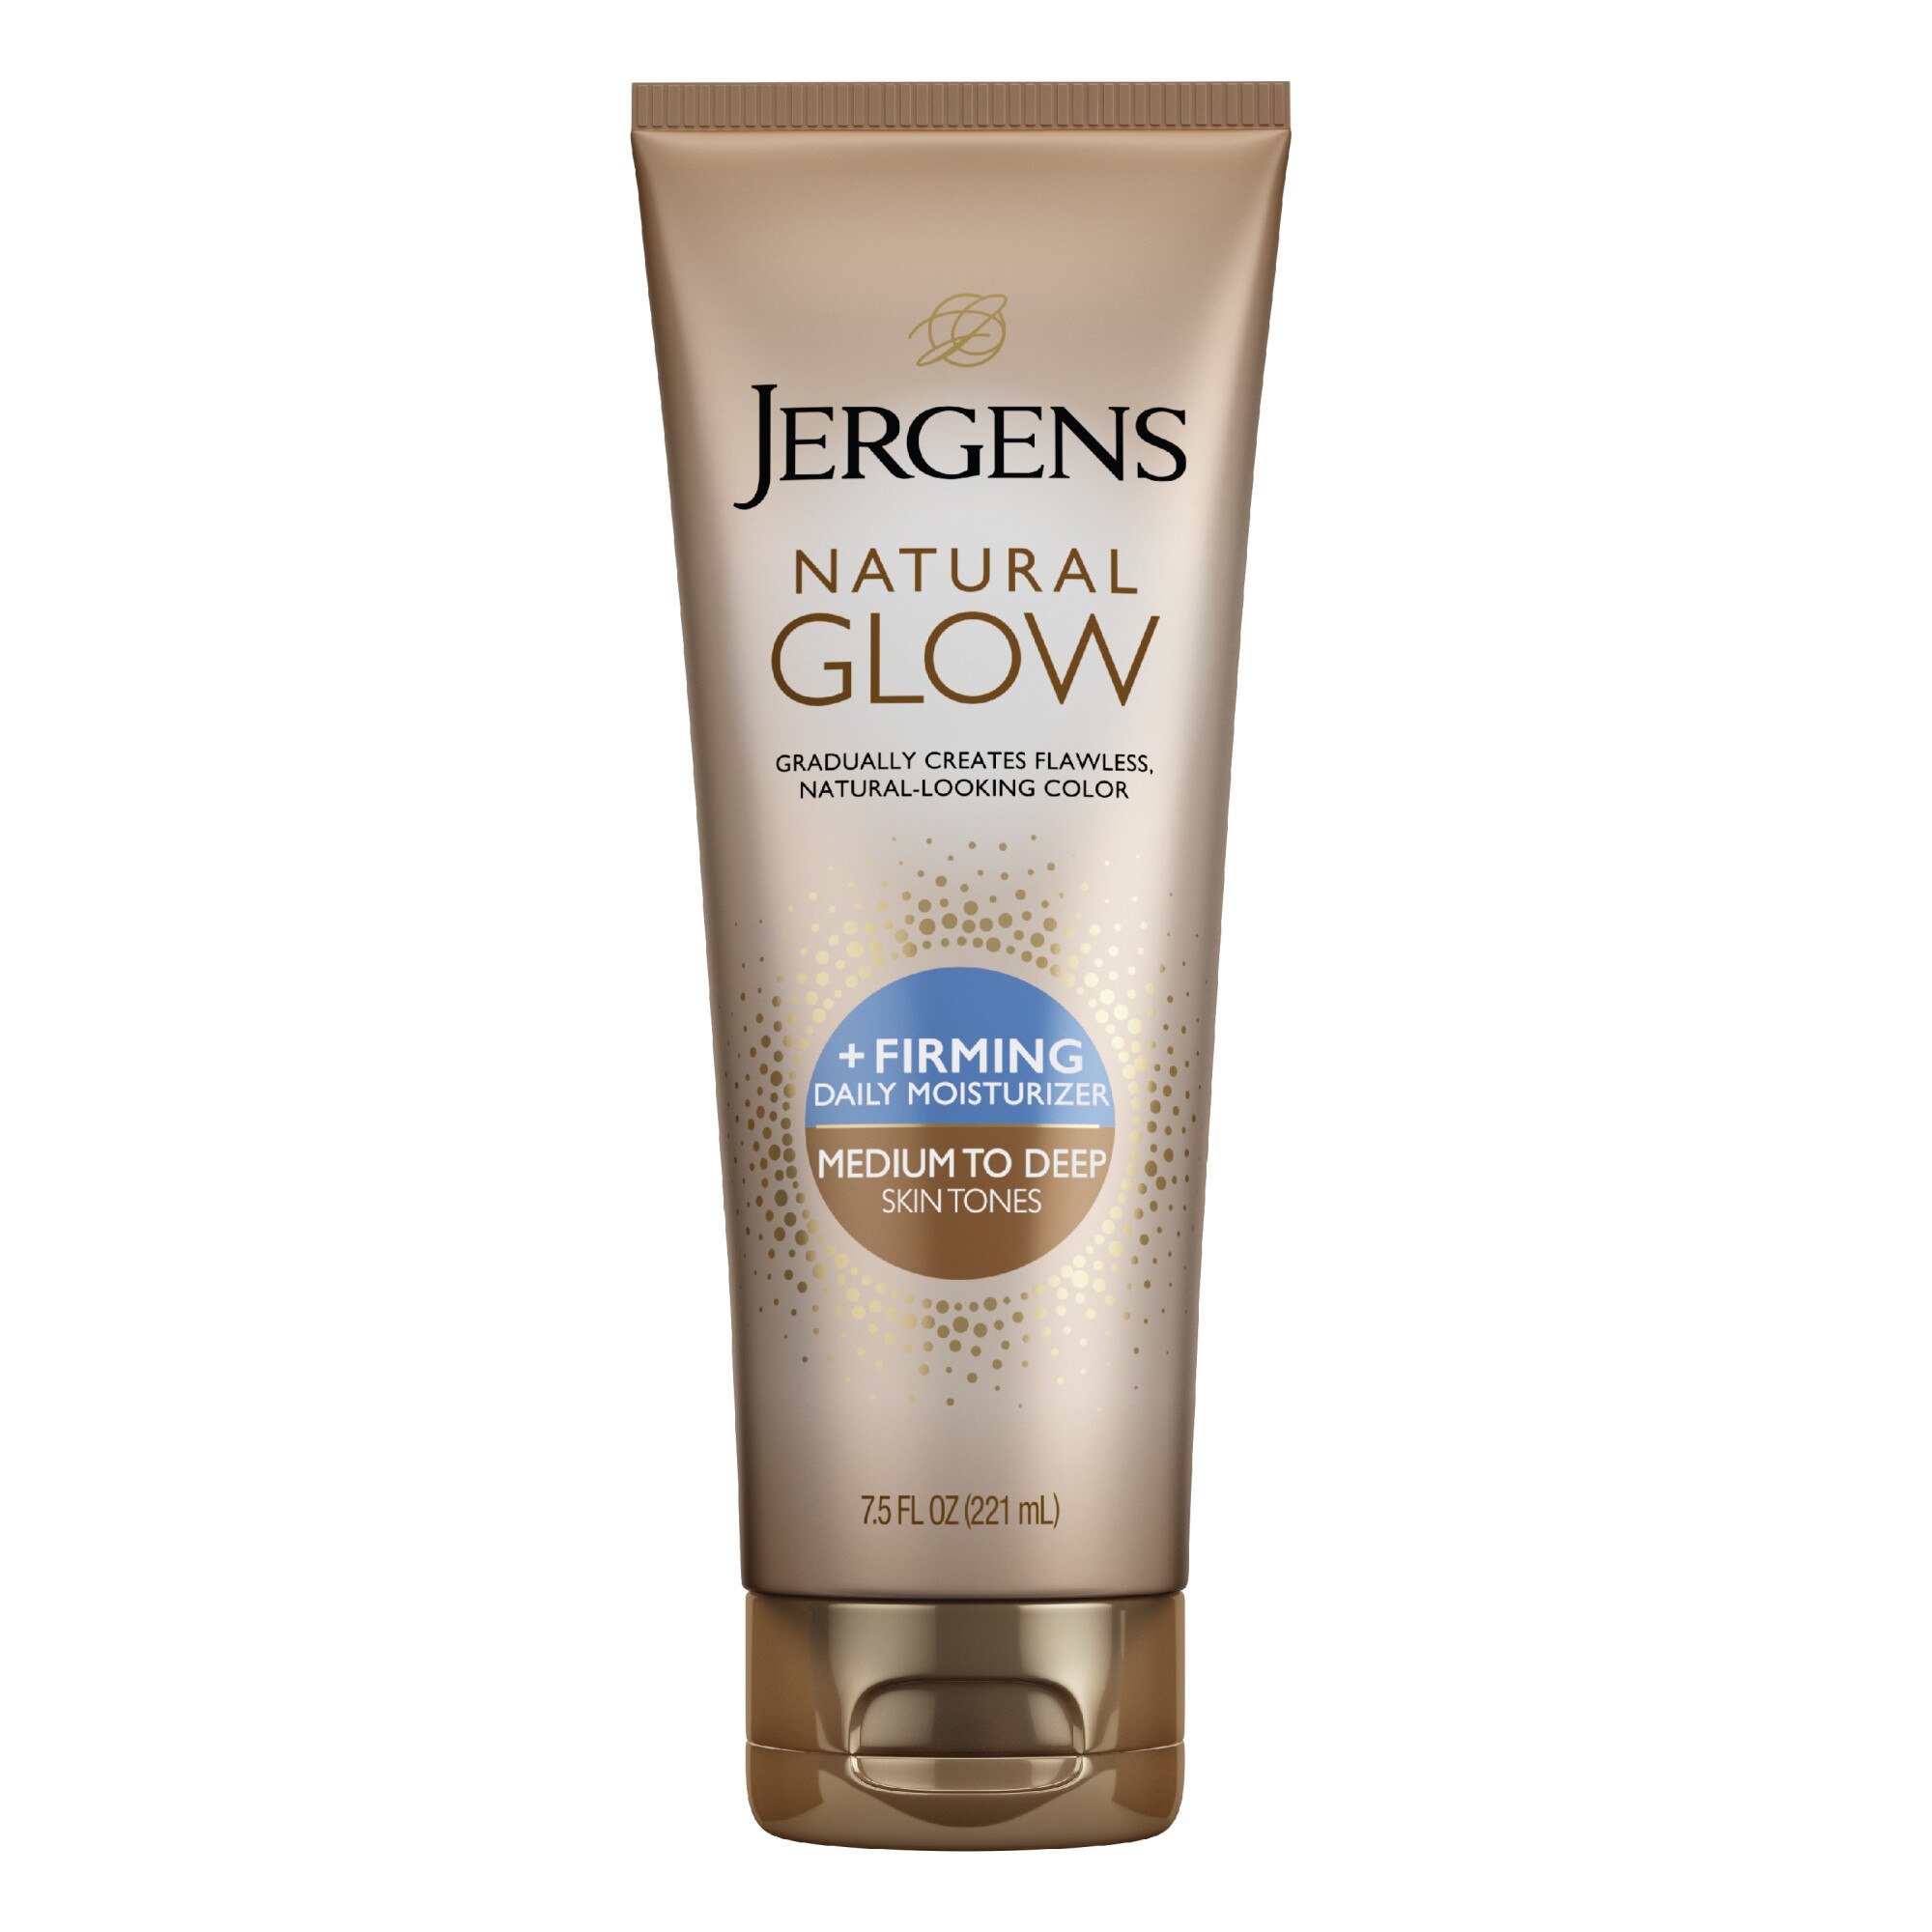 Jergens Natural Glow +FIRMING Self Tanner, Anti Cellulite Firming Body Lotion for Natural-Looking Tan, 7.5 OZ